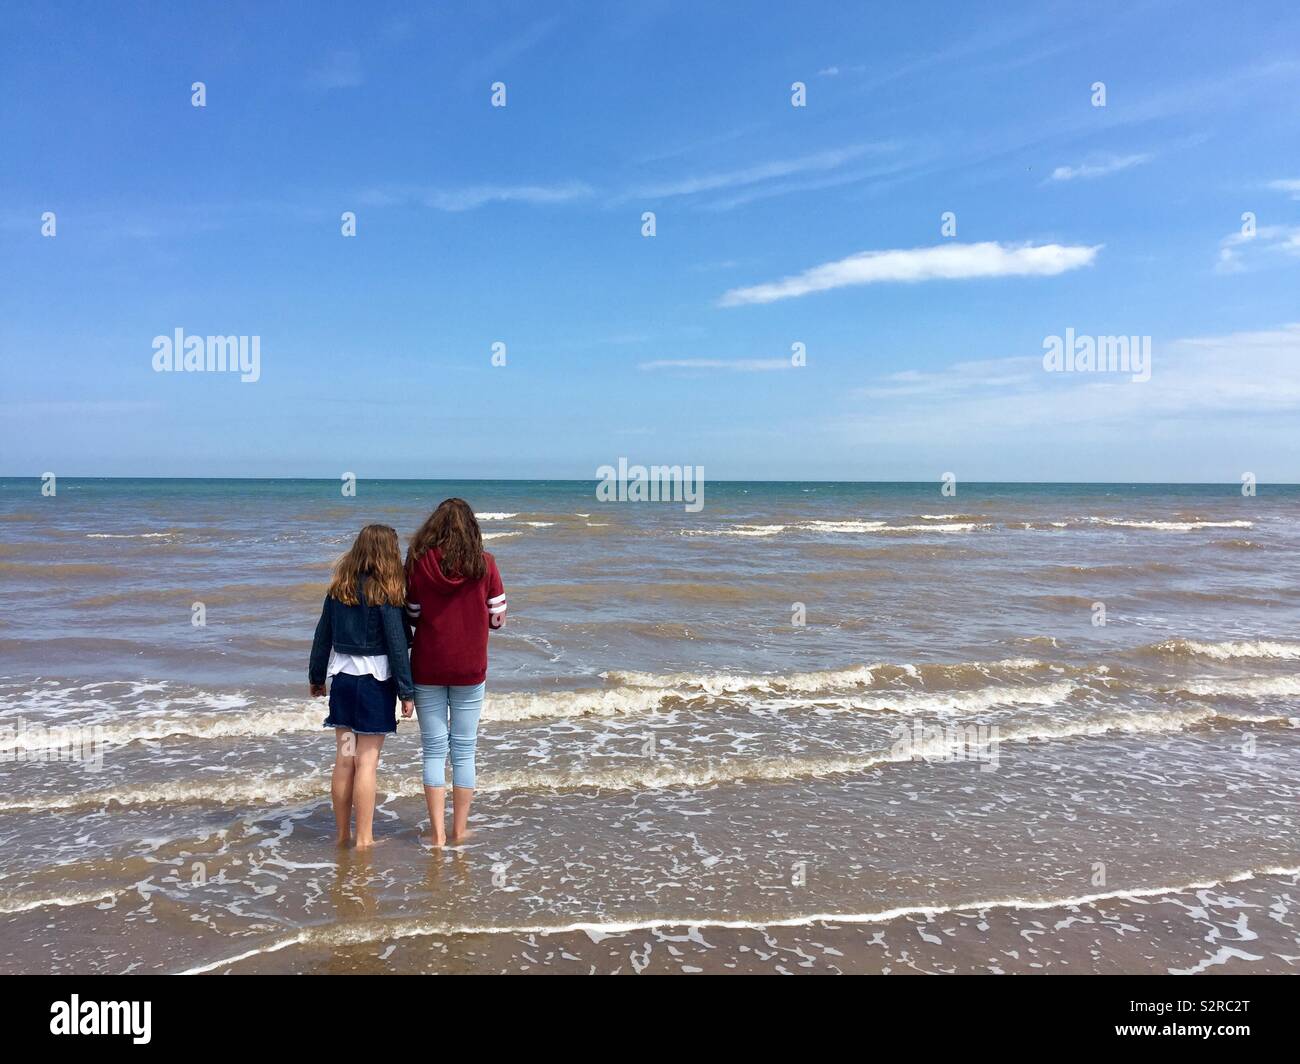 Looking out to sea, girls looking out to sea, paddling in the sea, sky, clouds, sea, sand, beach Stock Photo